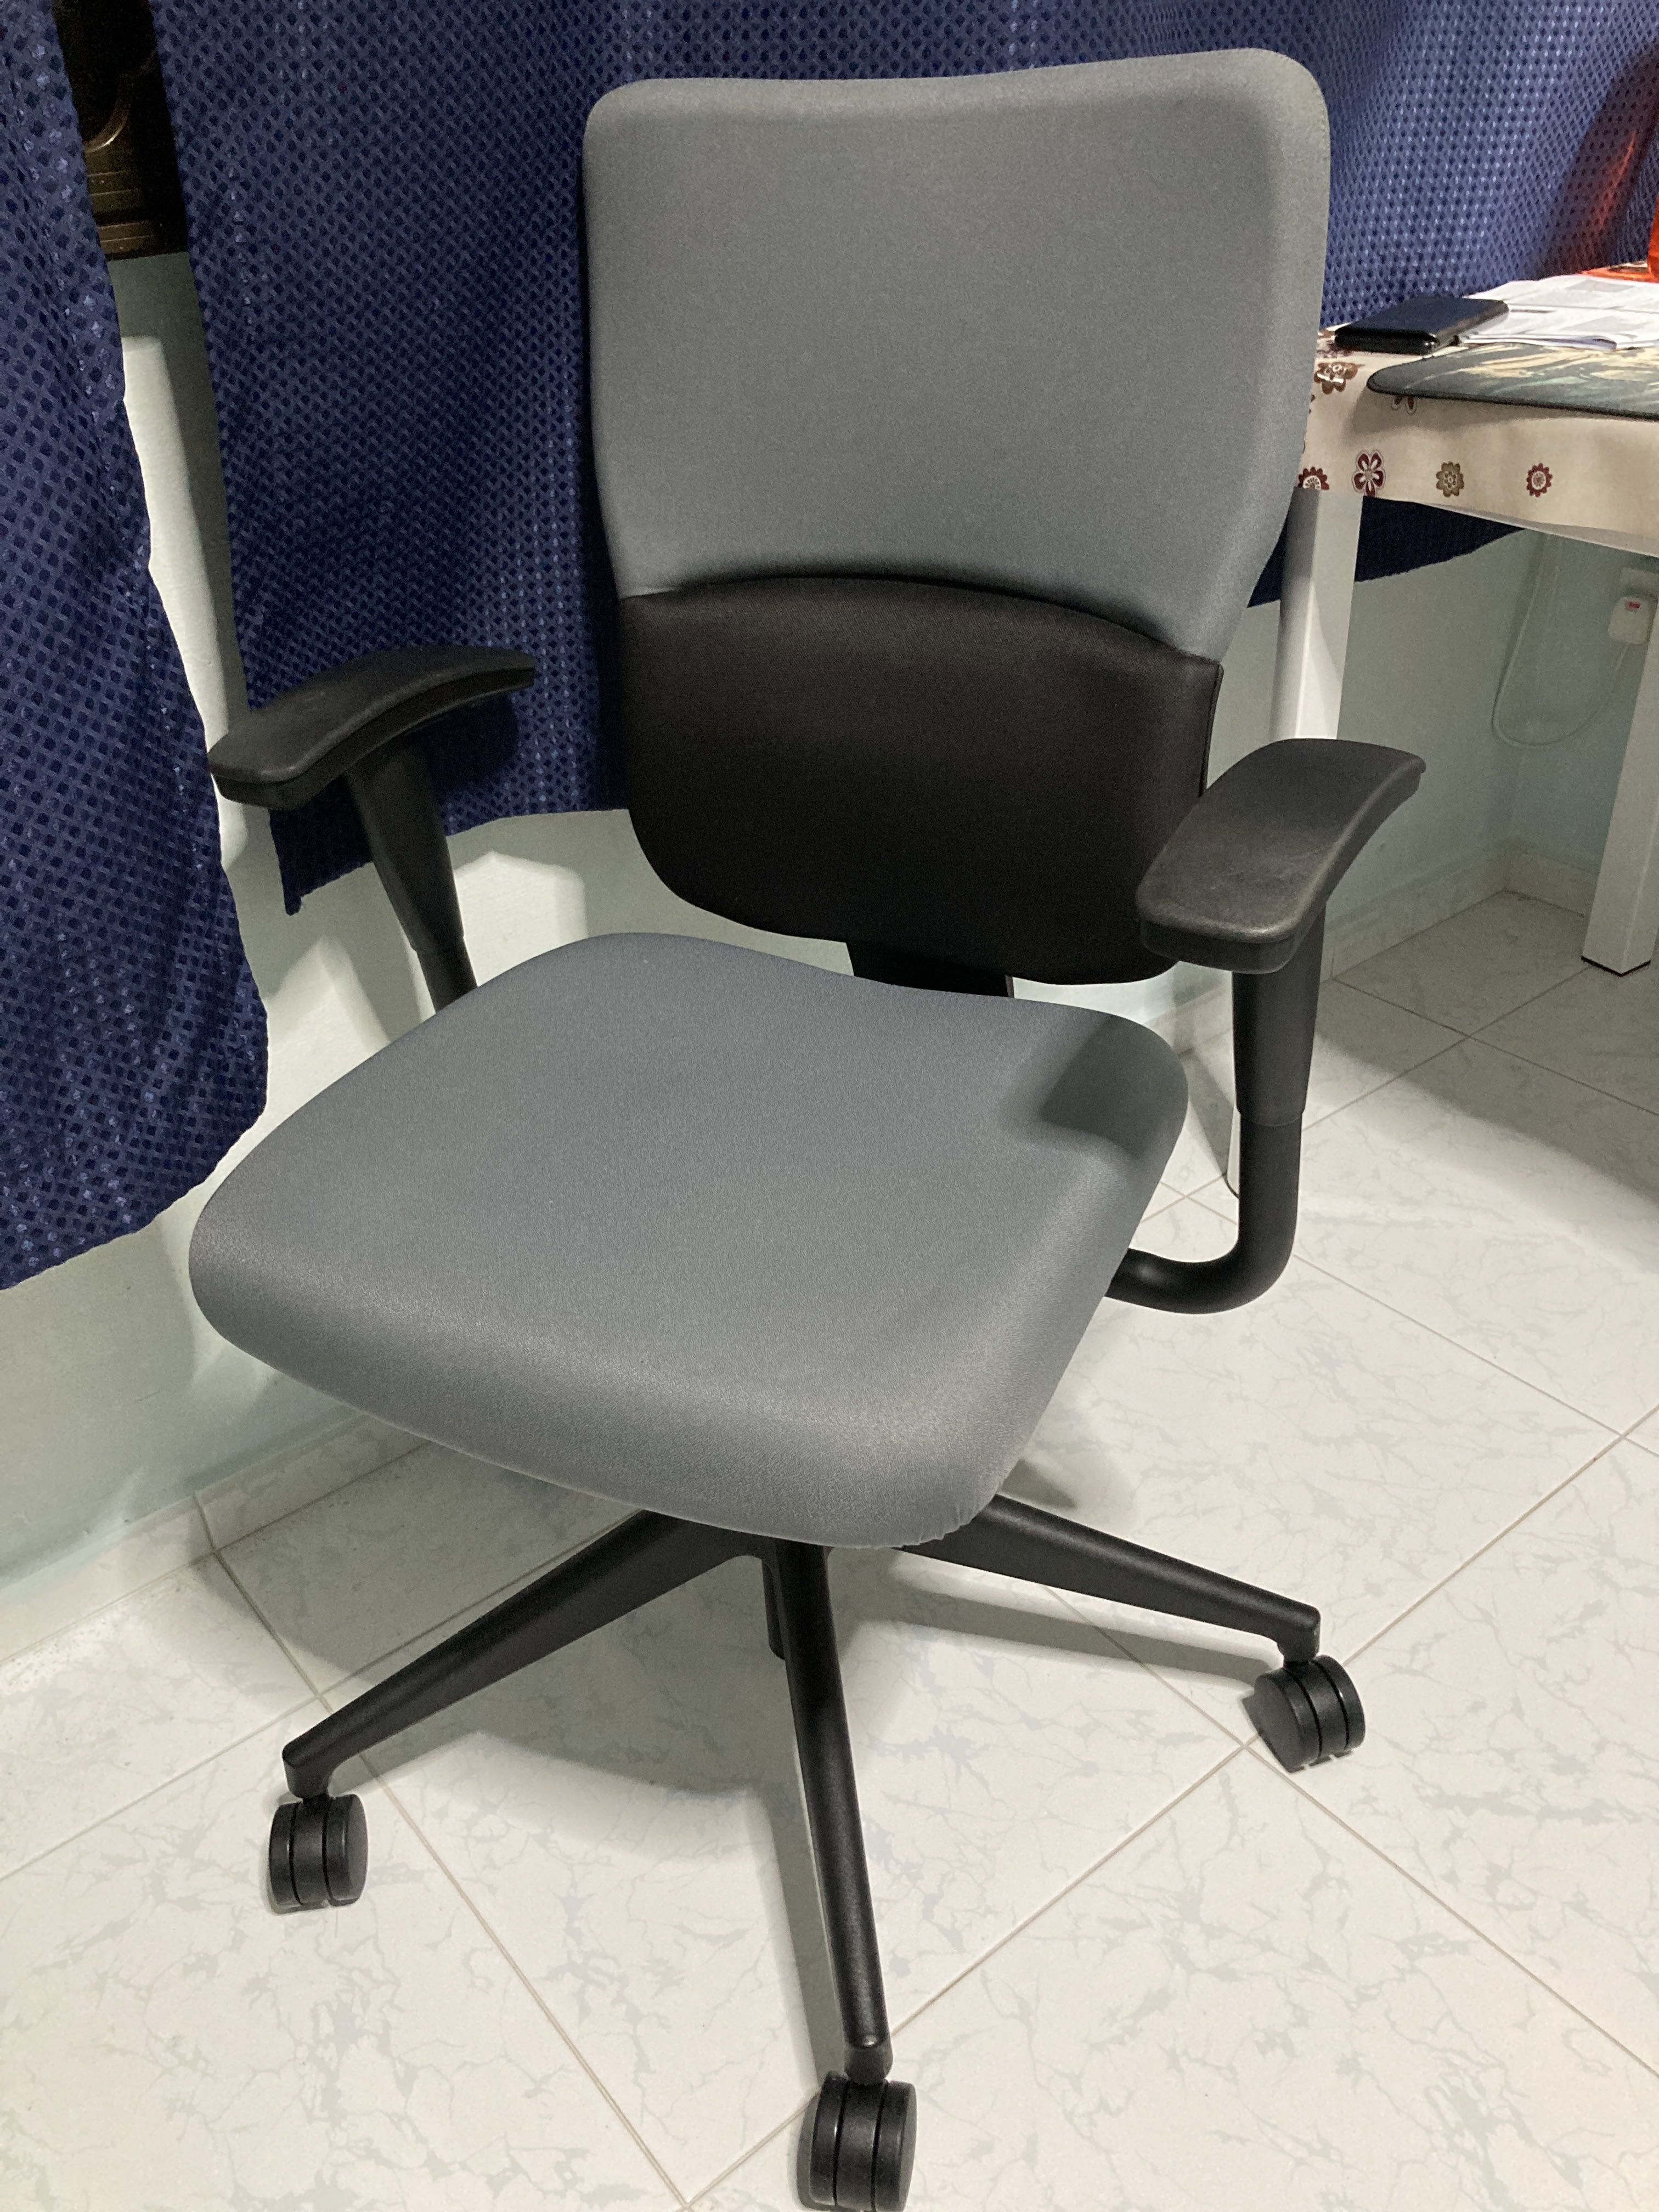 barely used !!! Steelcase  chair Office chair excellent condition PC chair 